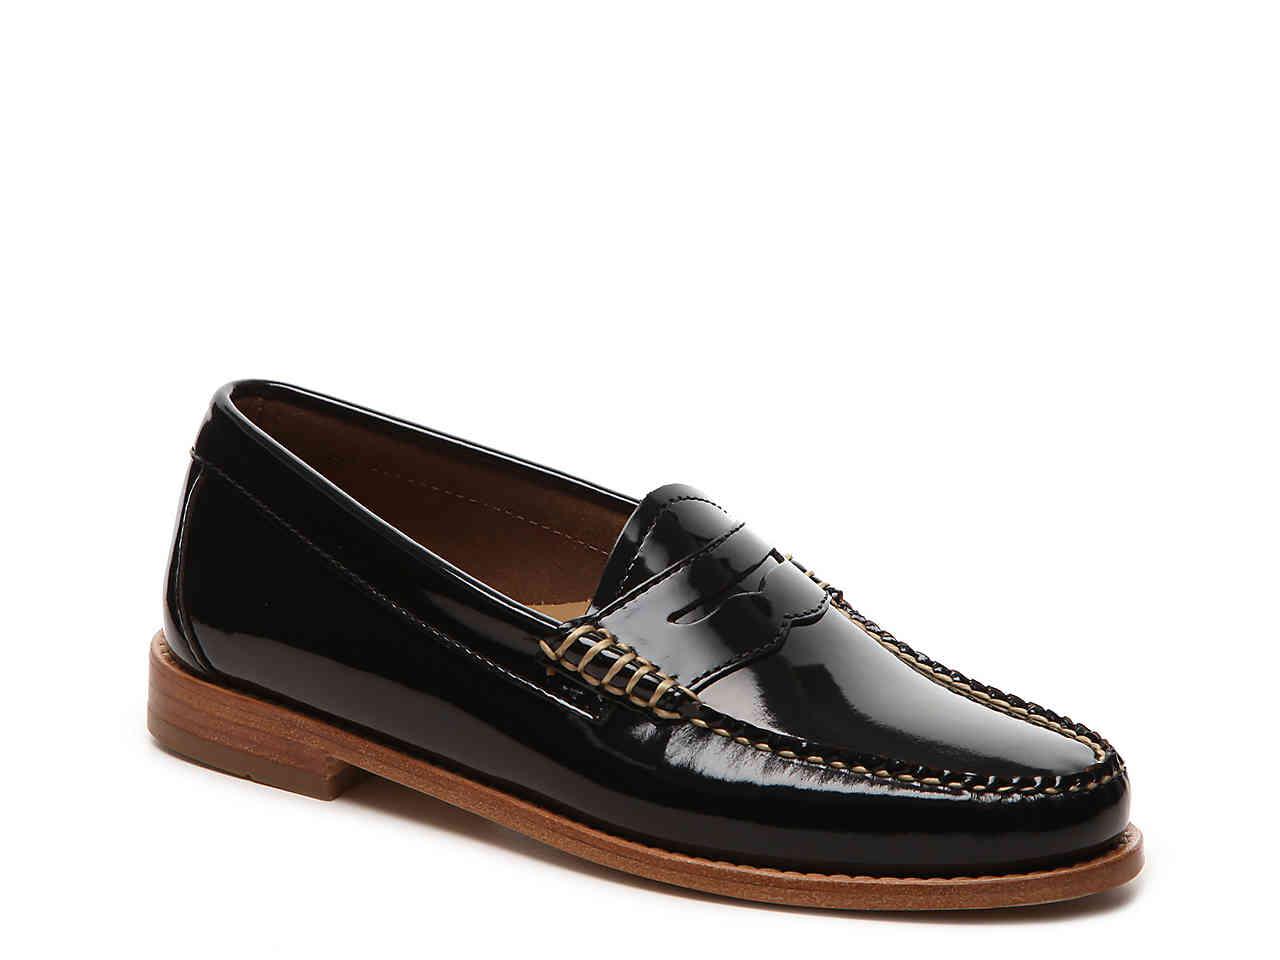 G.H.BASS Whitney Weejuns Patent Loafer in Black - Lyst